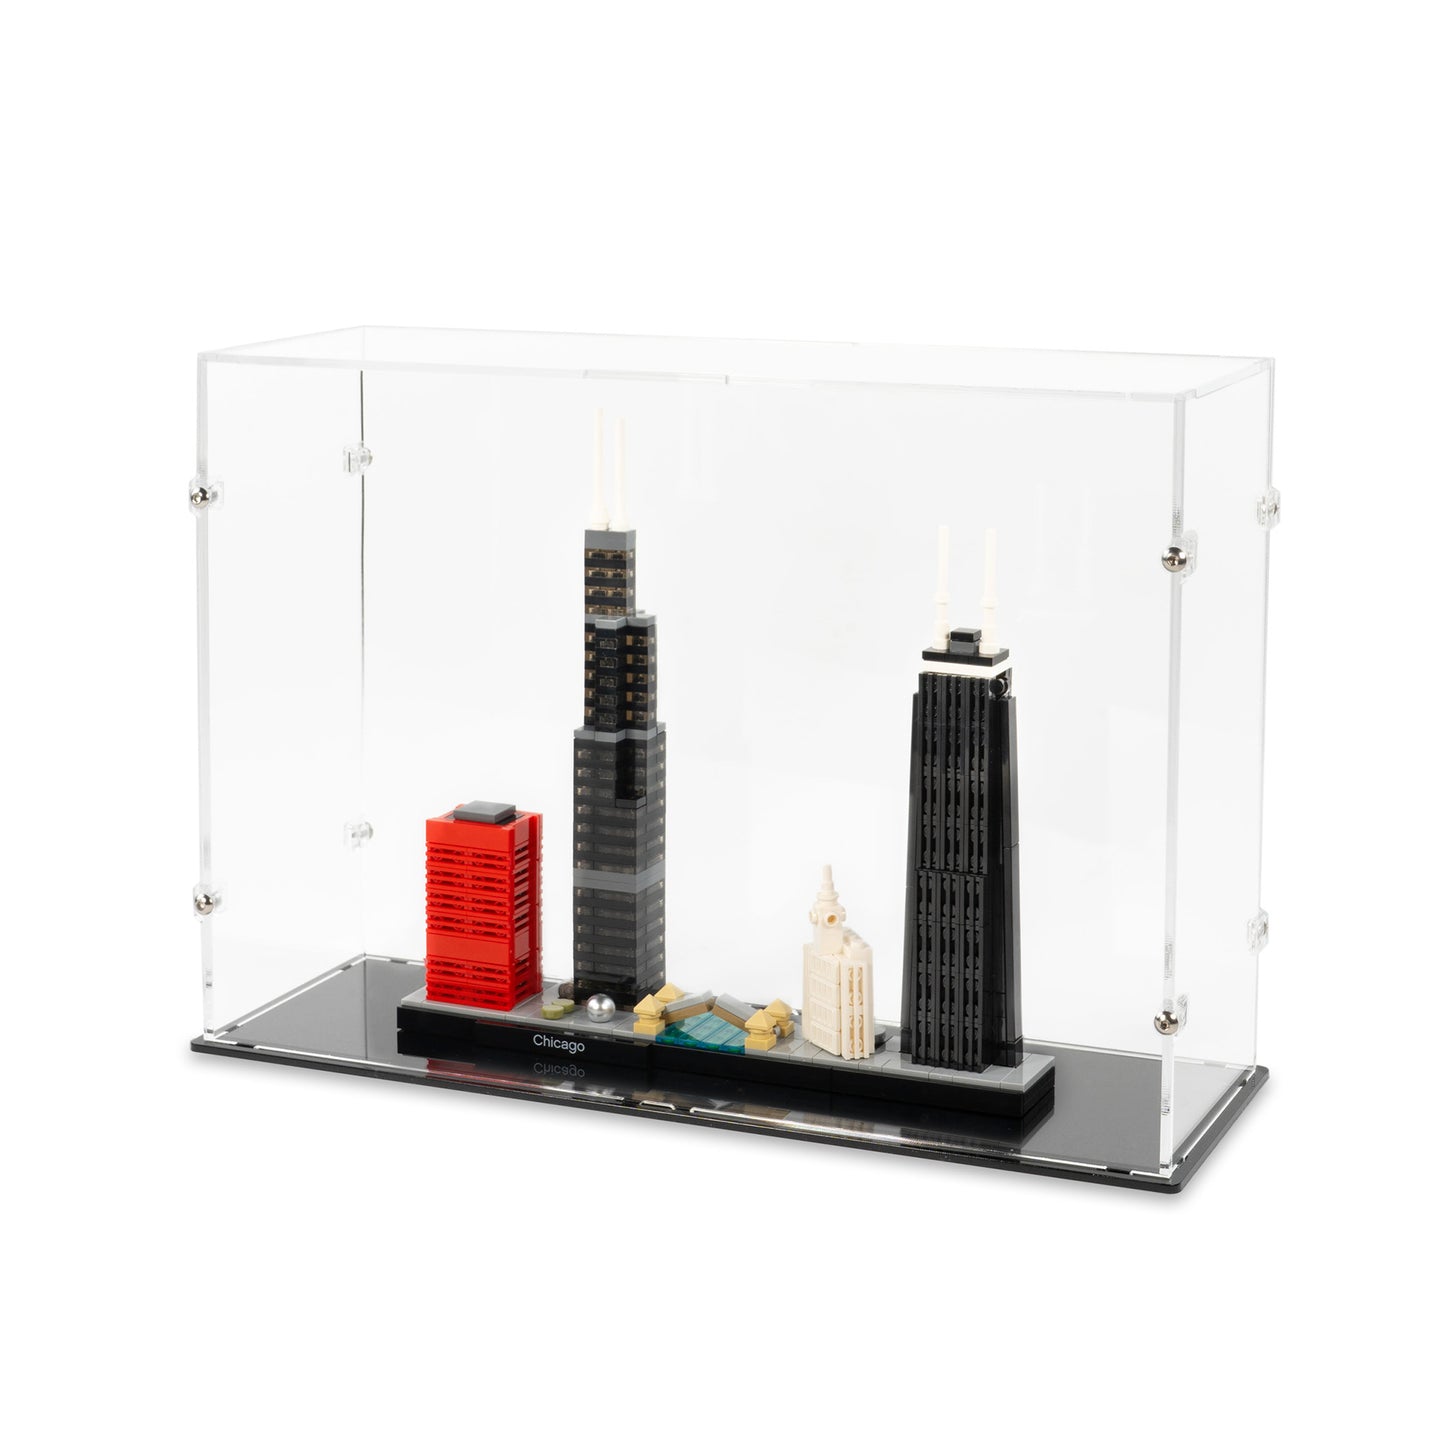 Angled top view of LEGO 21033 Chicago Display Case.